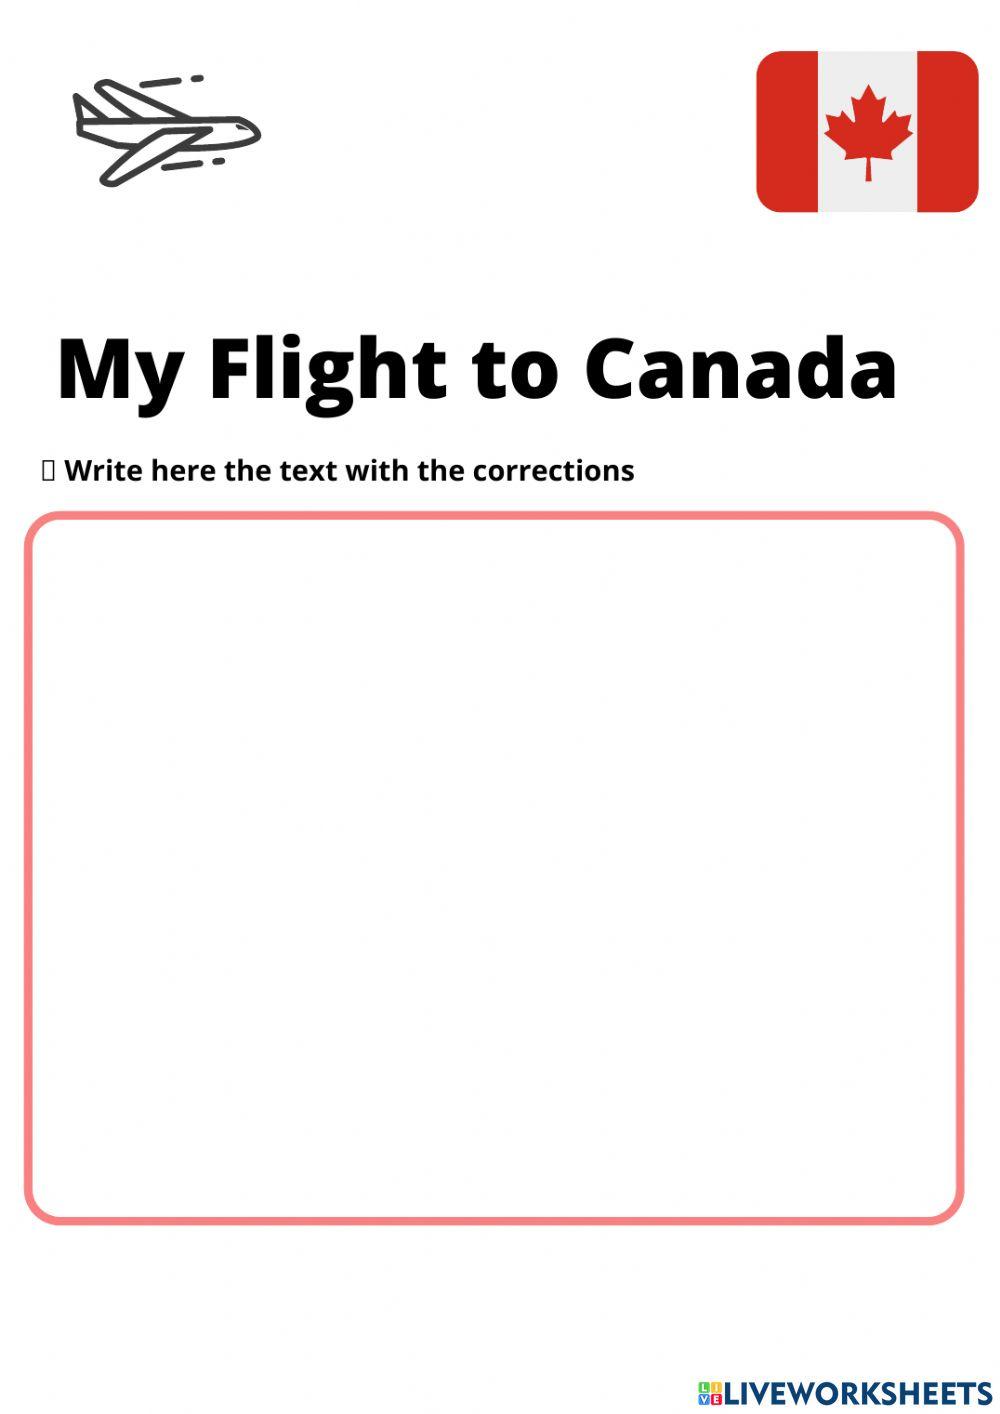 My flight to Canada- Past corrections